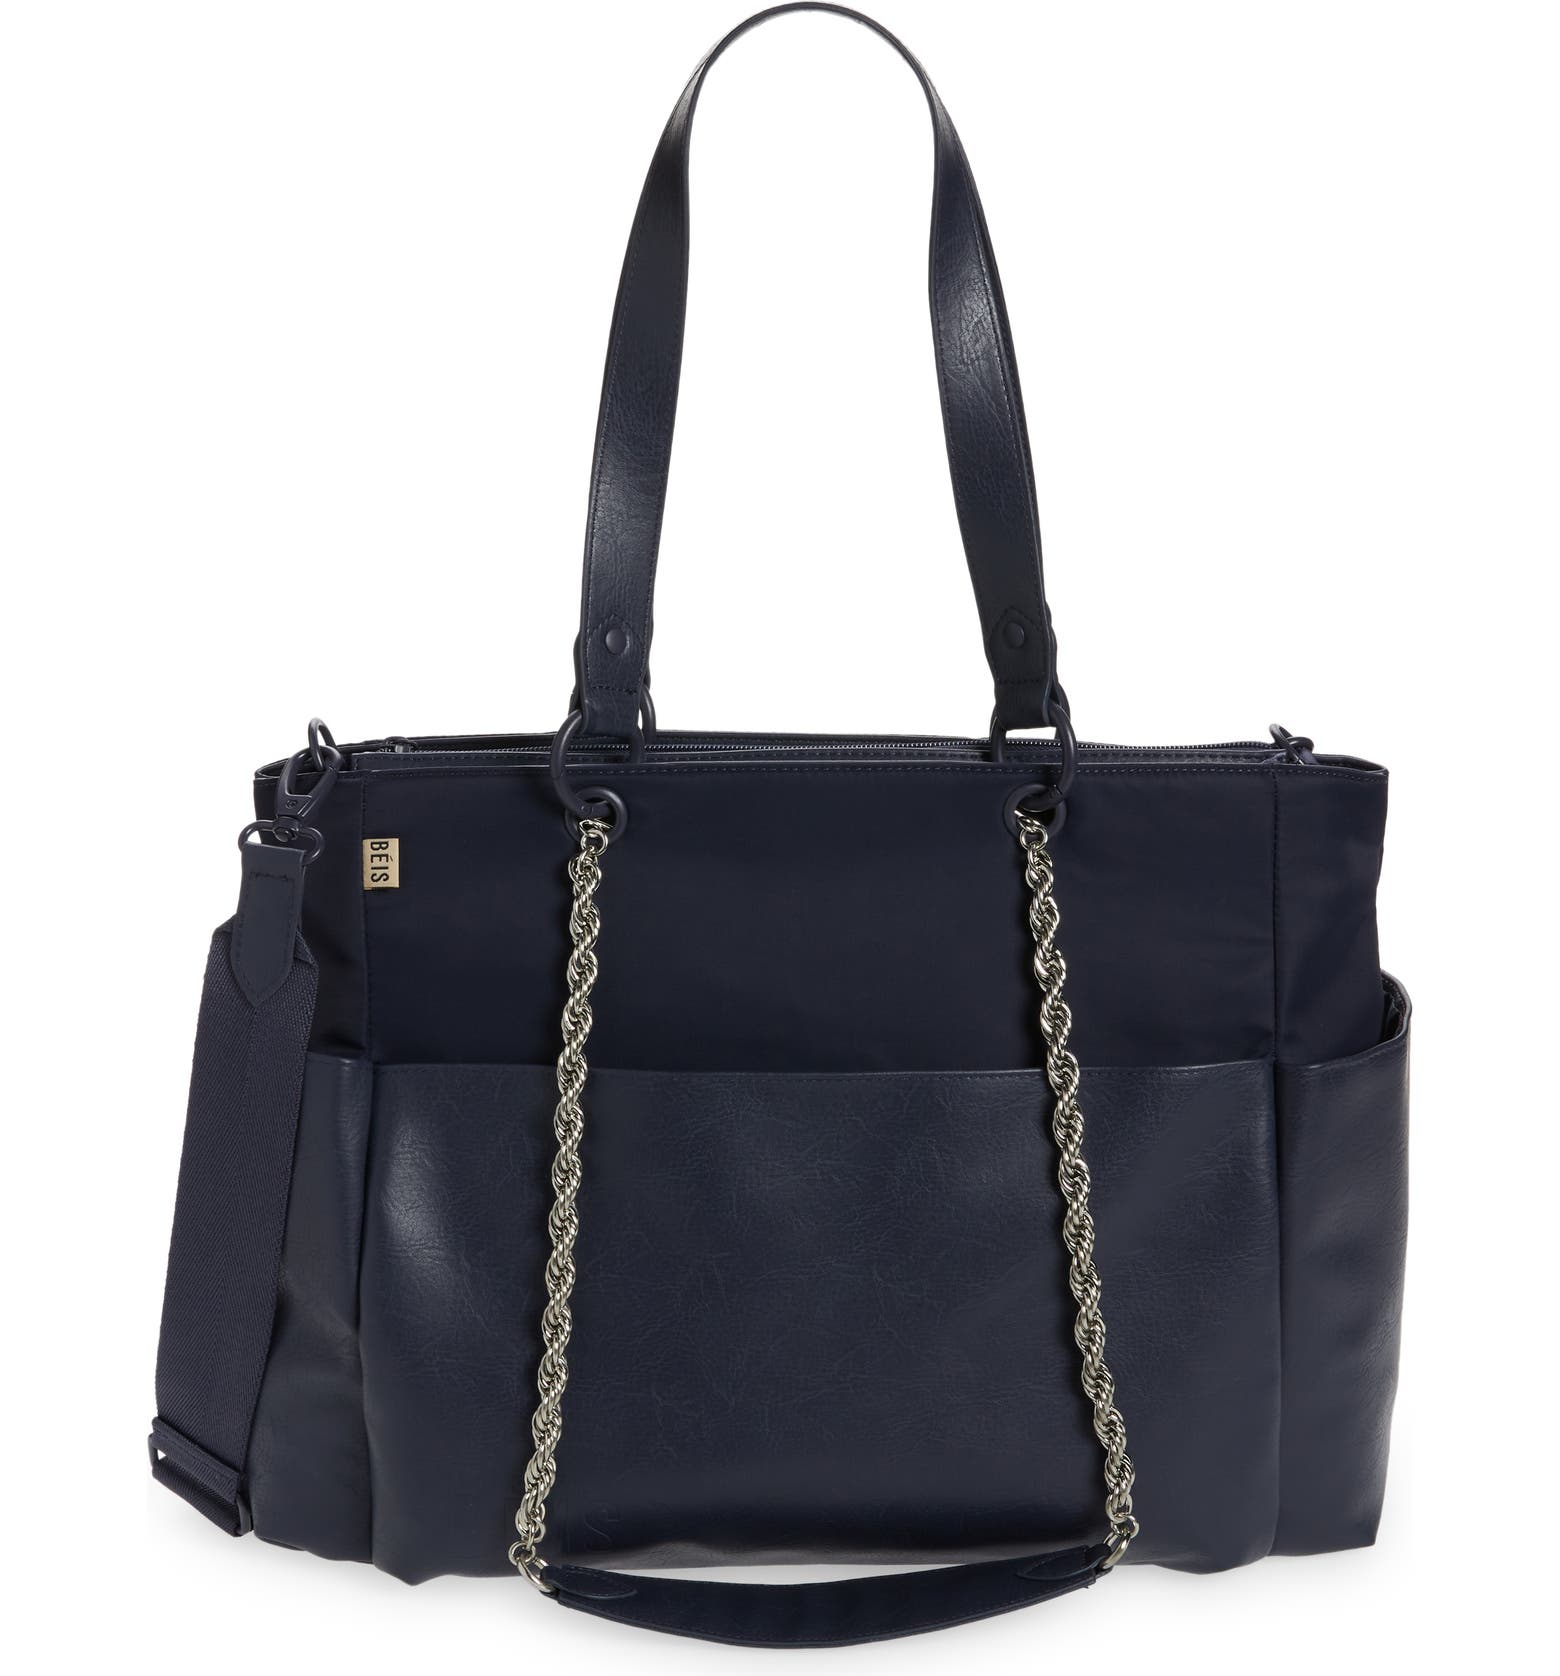 The Diaper Bag – Béis, black with silver chain strap